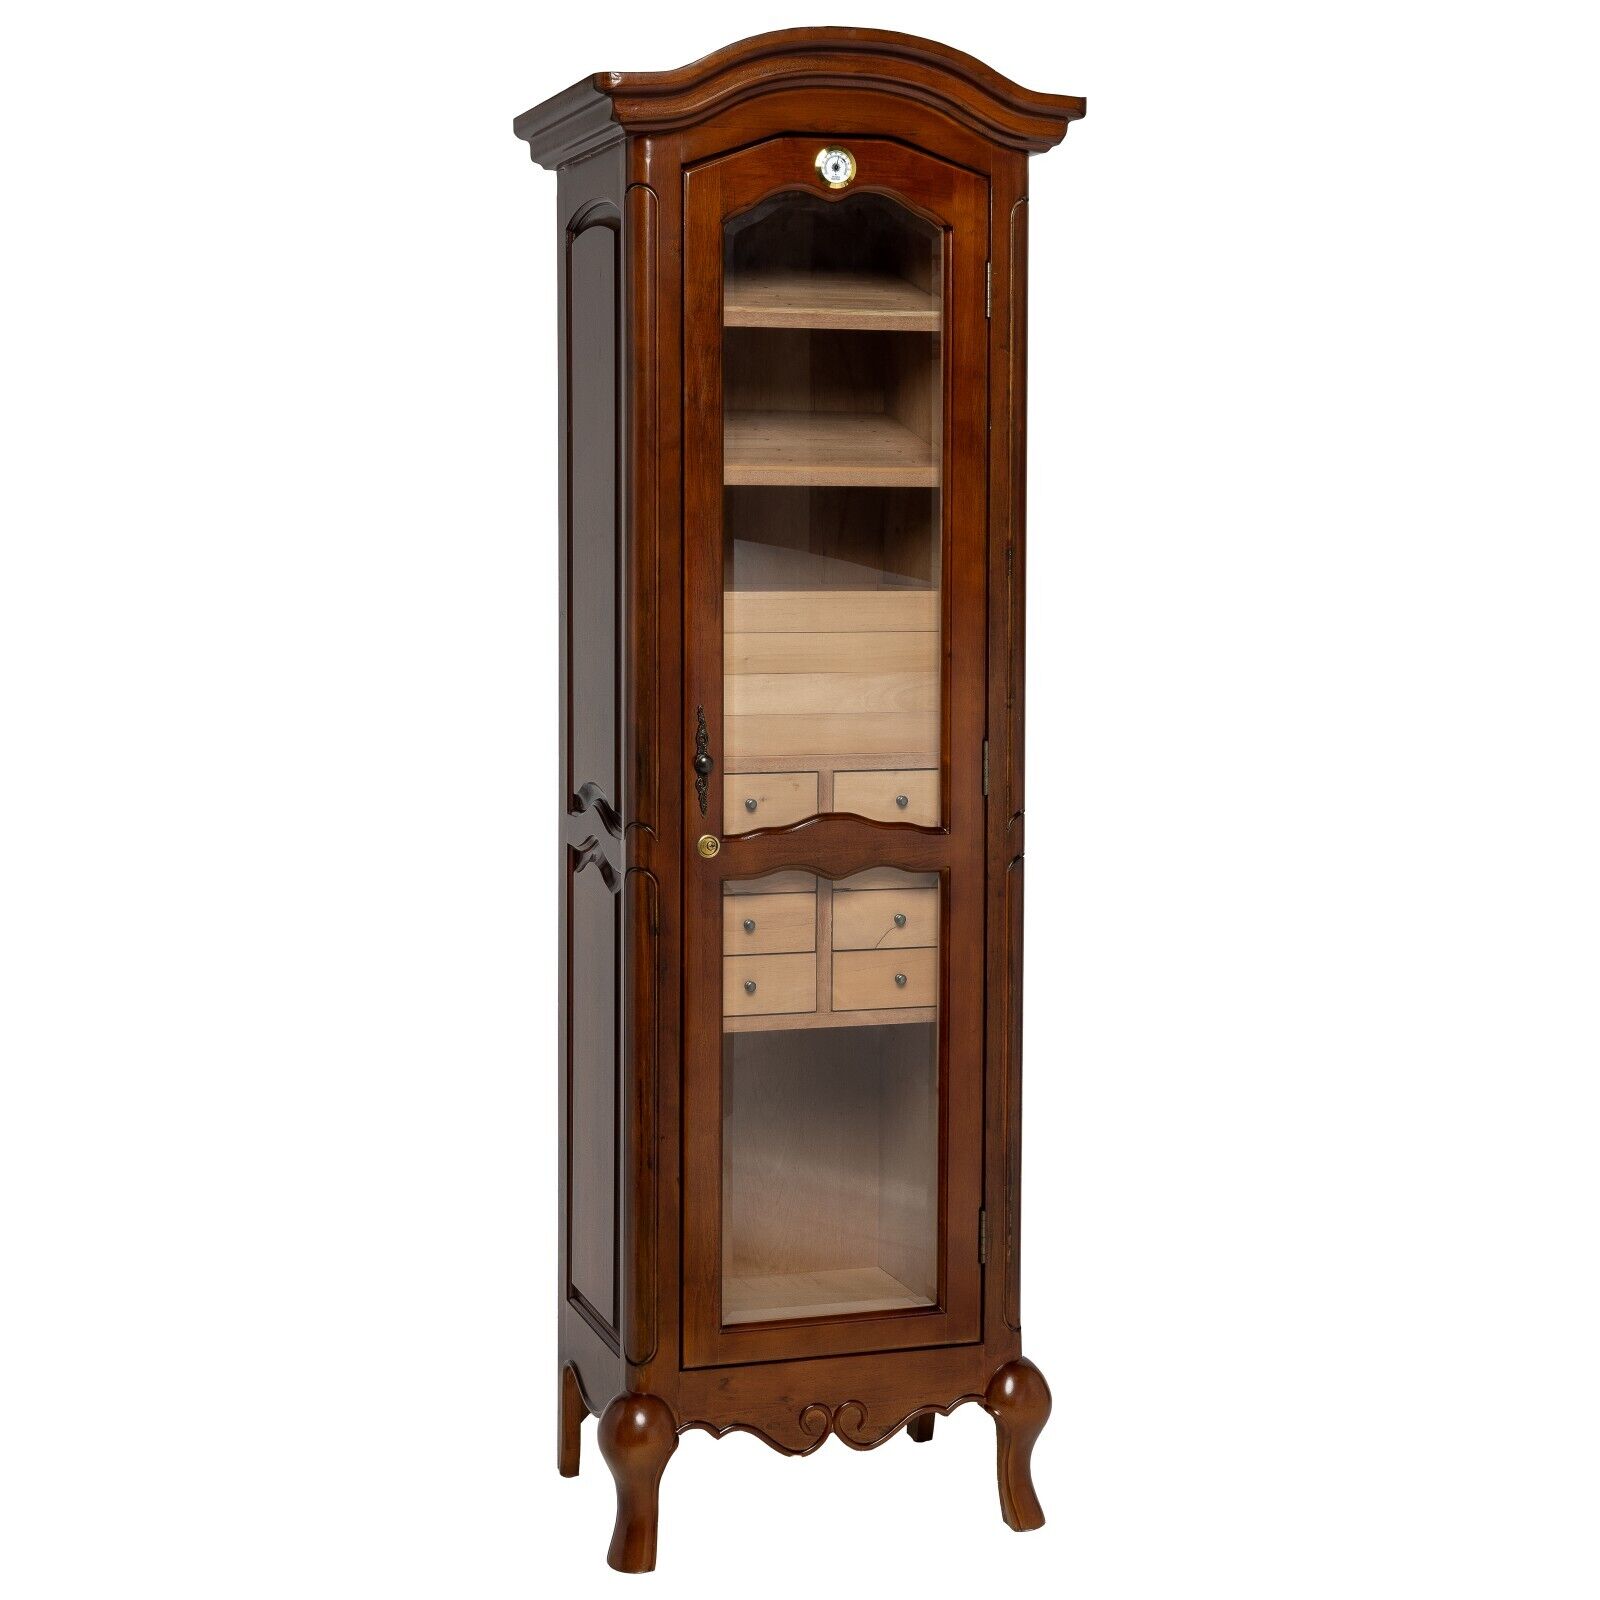 Quality Importers Trading Antique Cabinet Humidor W/ Drawers Holds 3000 Cigars